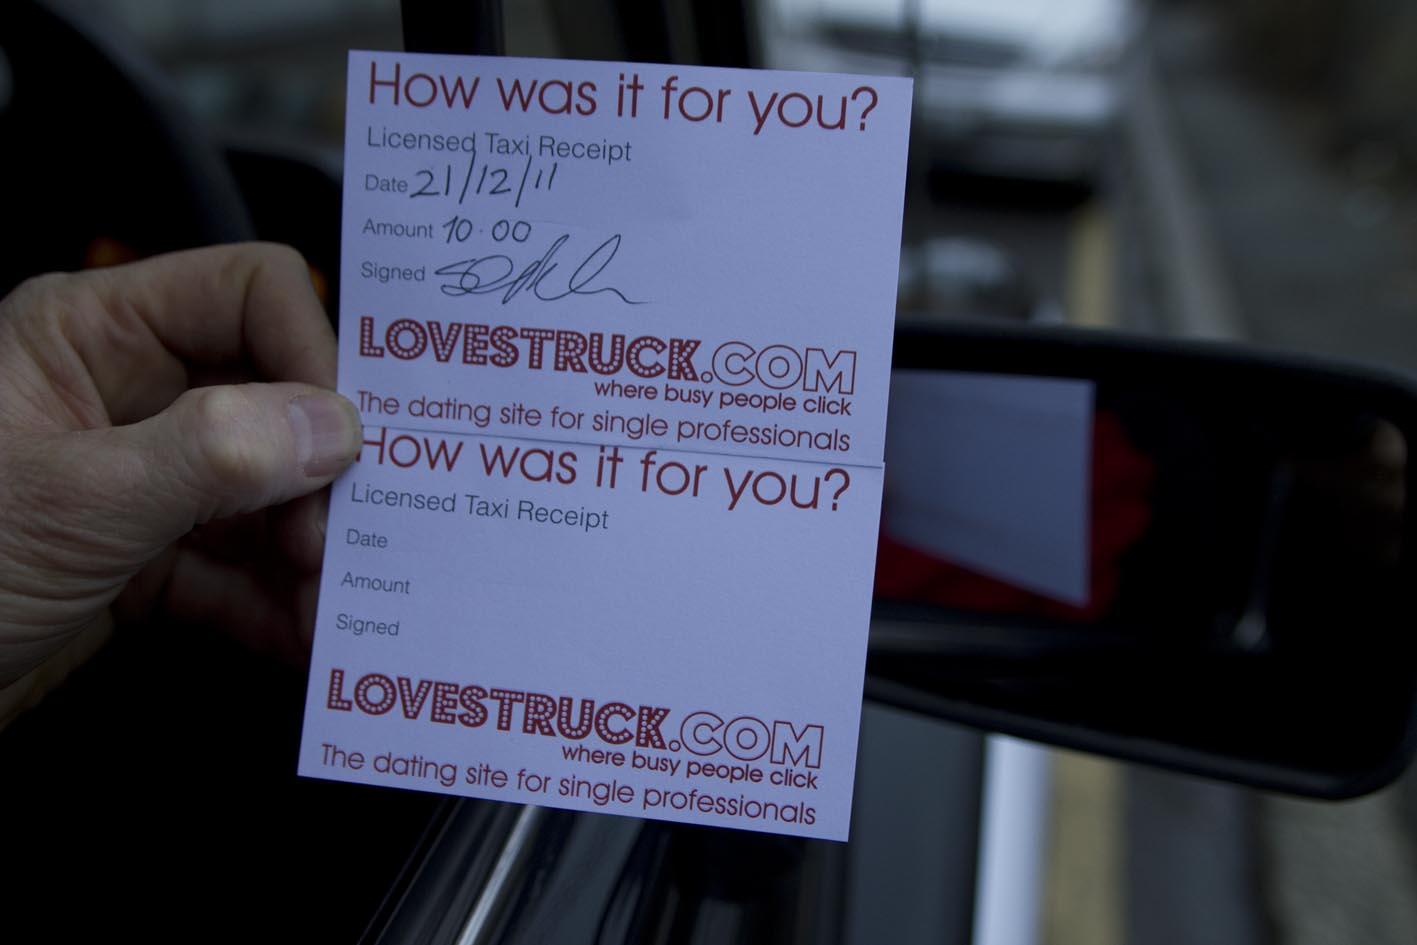 2012 Ubiquitous taxi advertising campaign for Lovestruck.com - Get Lovestruck in London